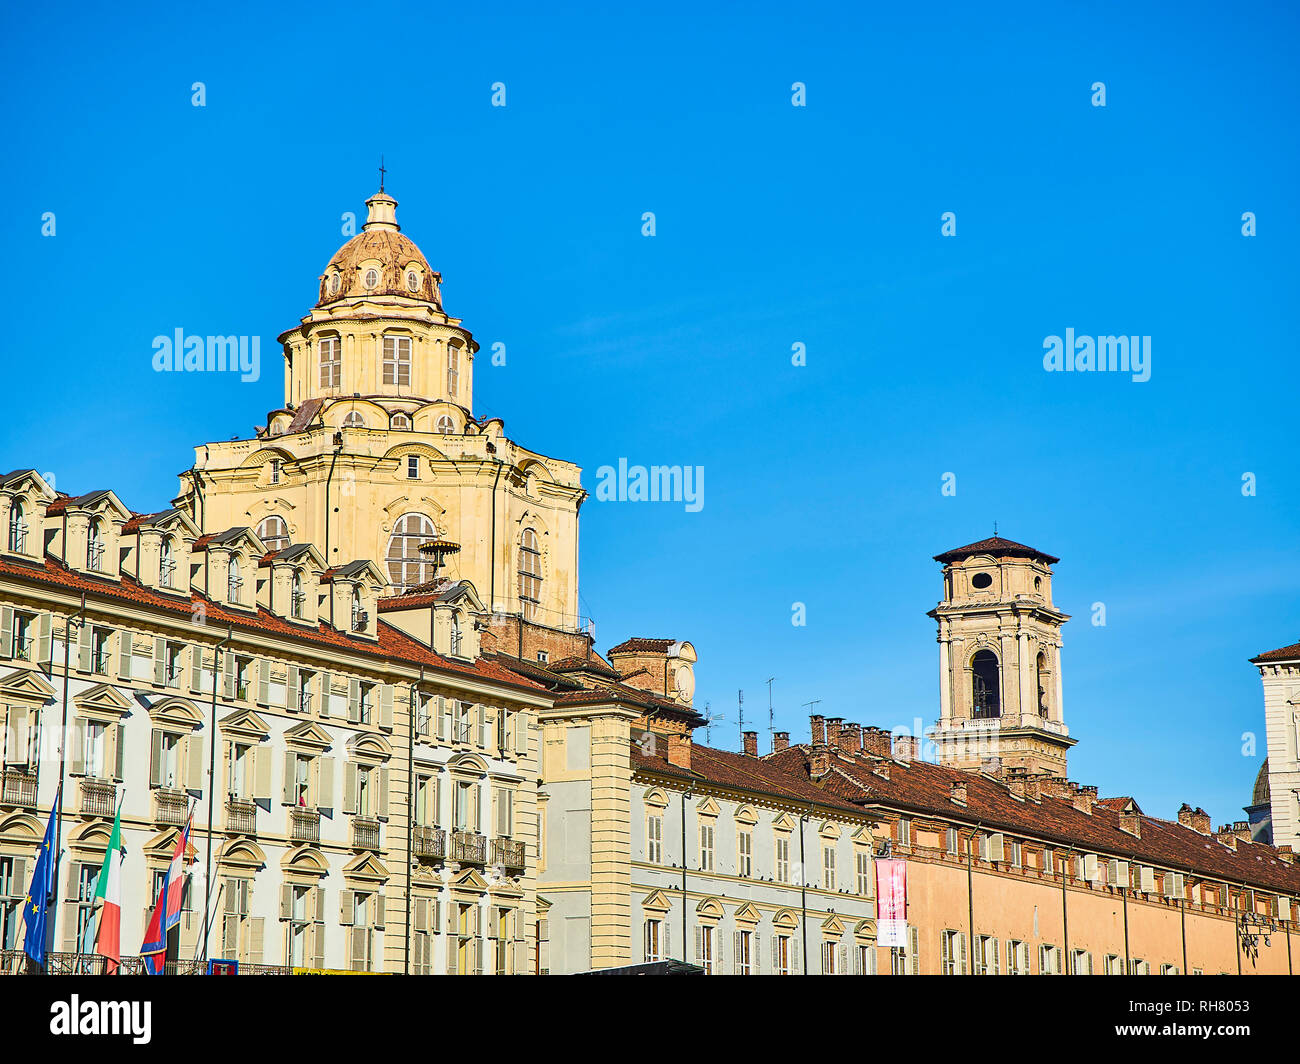 Dome of the Real Chiesa di San Lorenzo church and the Bell Tower of the San Giovanni Battista Cathedral in the background. View from the Piazza Castel Stock Photo